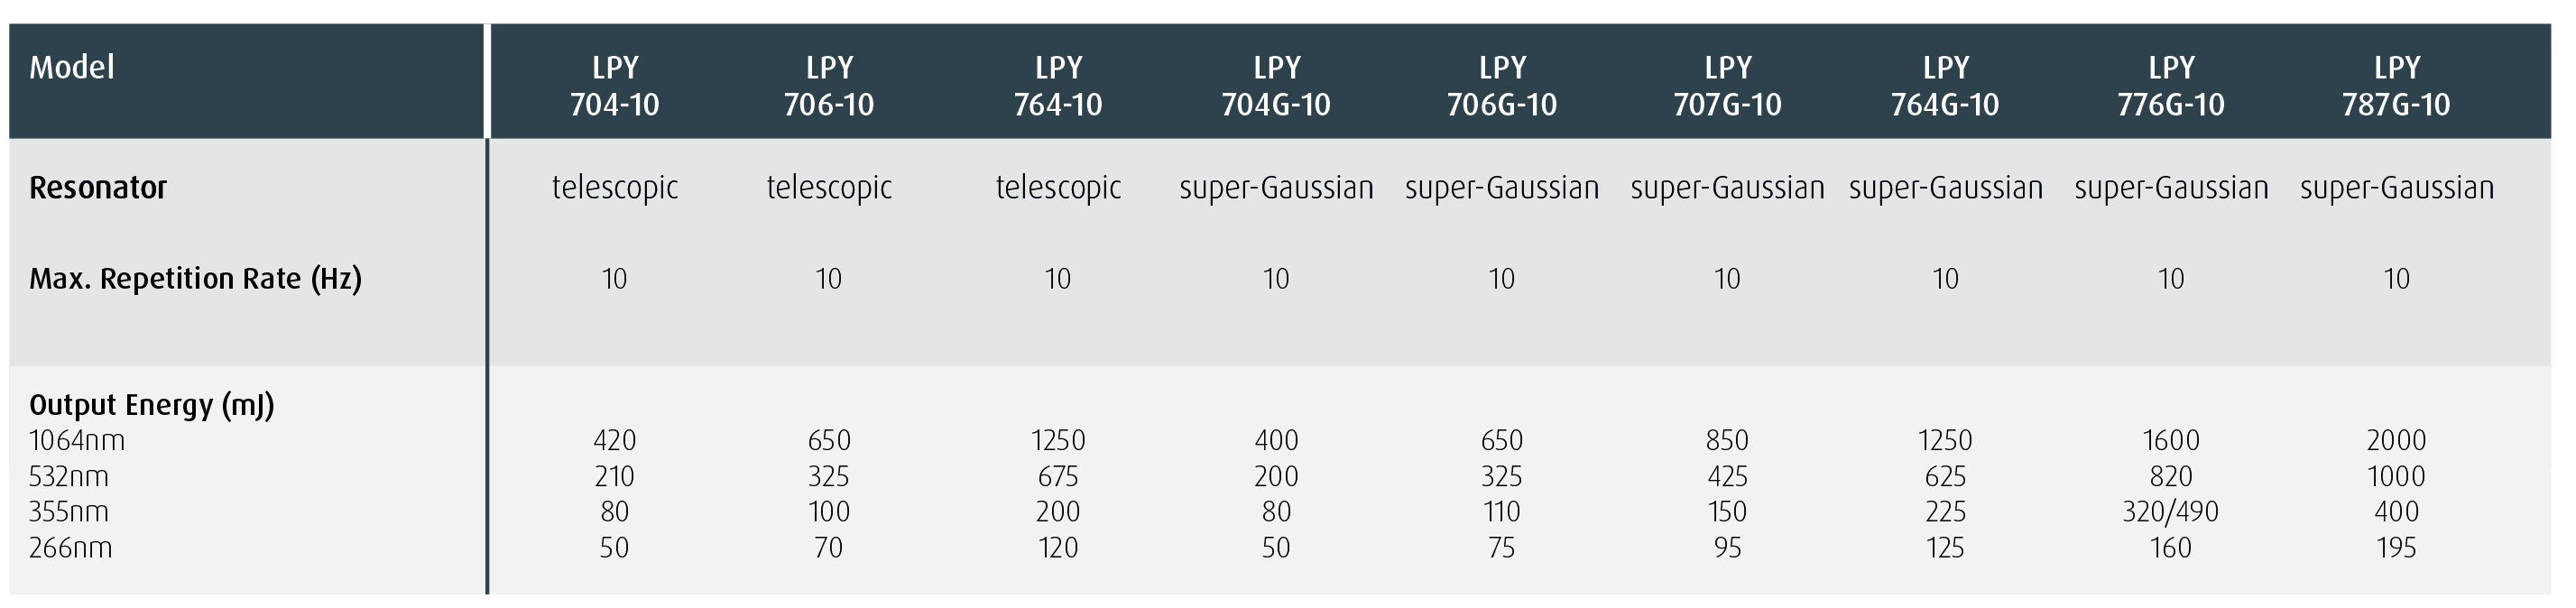 LPY700 10Hz Range Specification Highlights